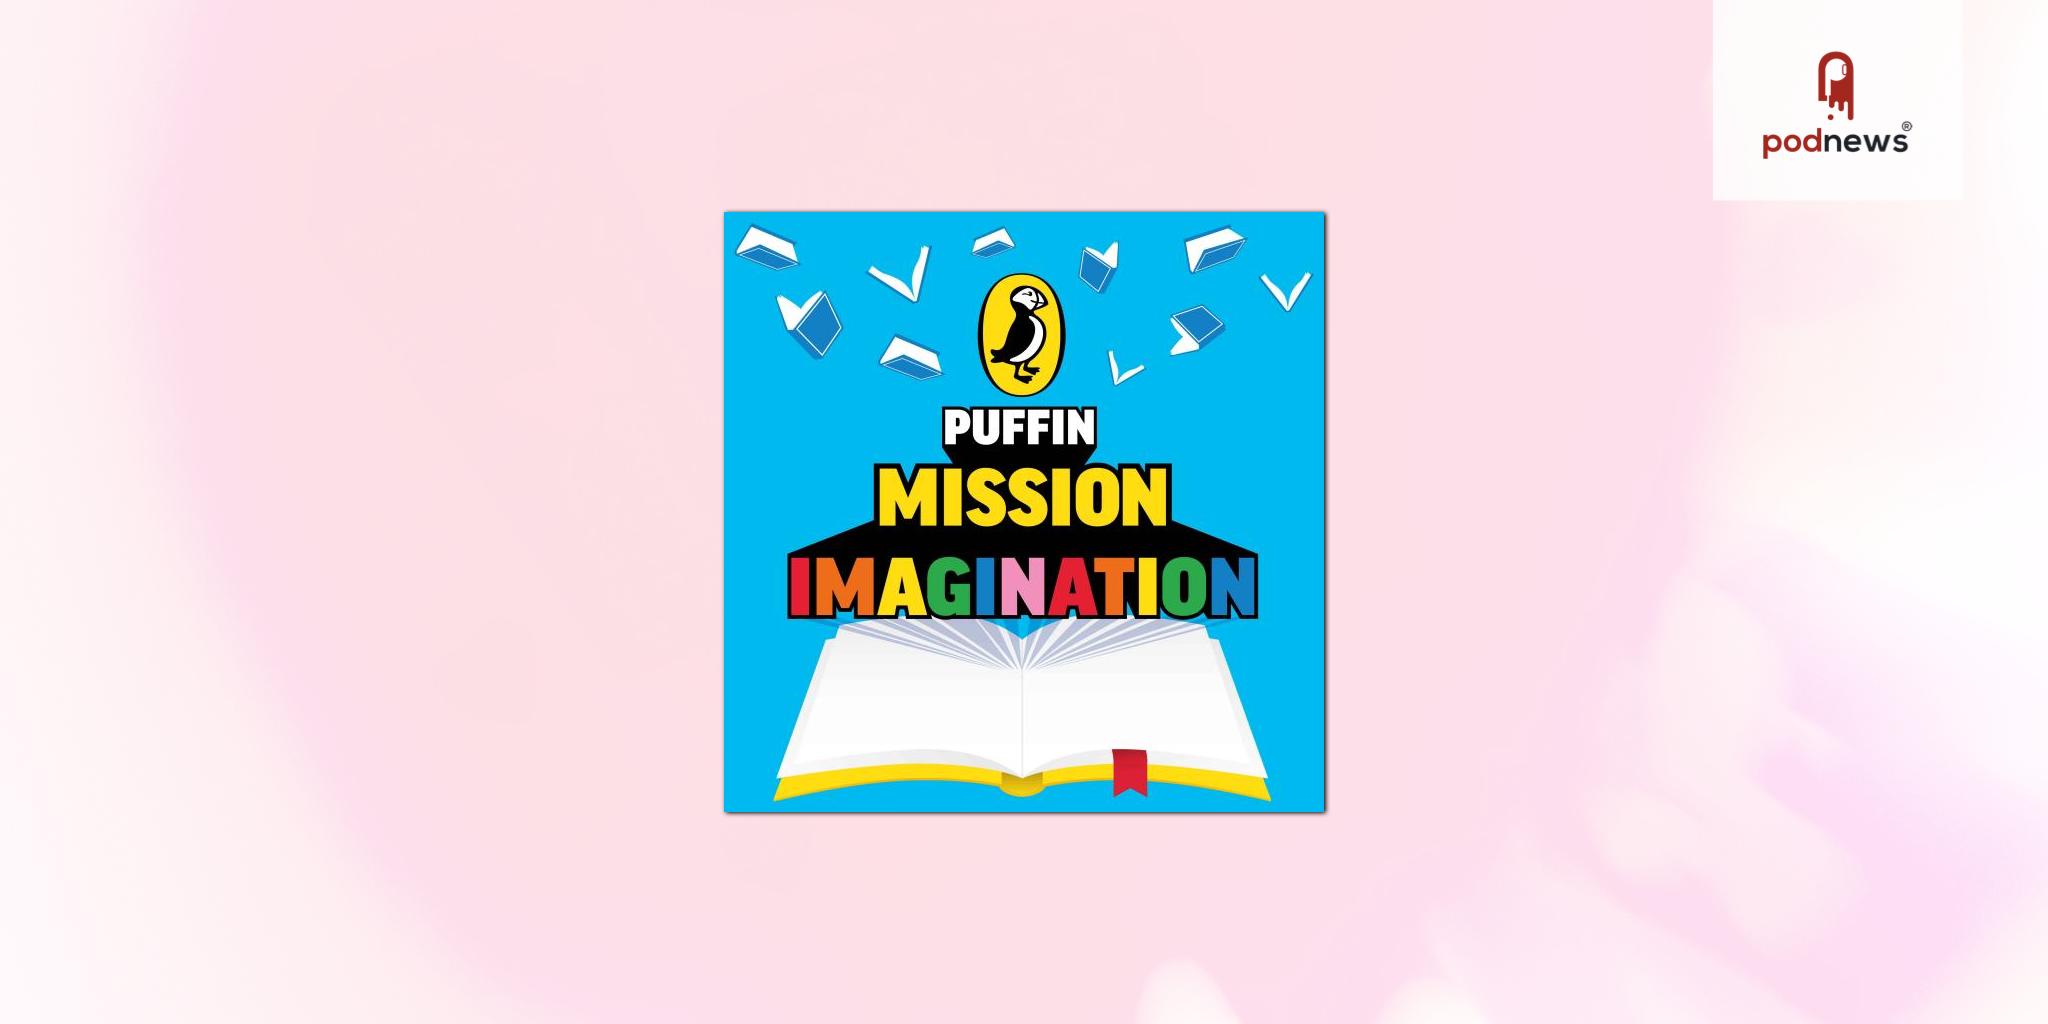 Puffin Podcast ‘Mission Imagination’ launched, hosted by multi award winning comedian Babatunde Aléshé